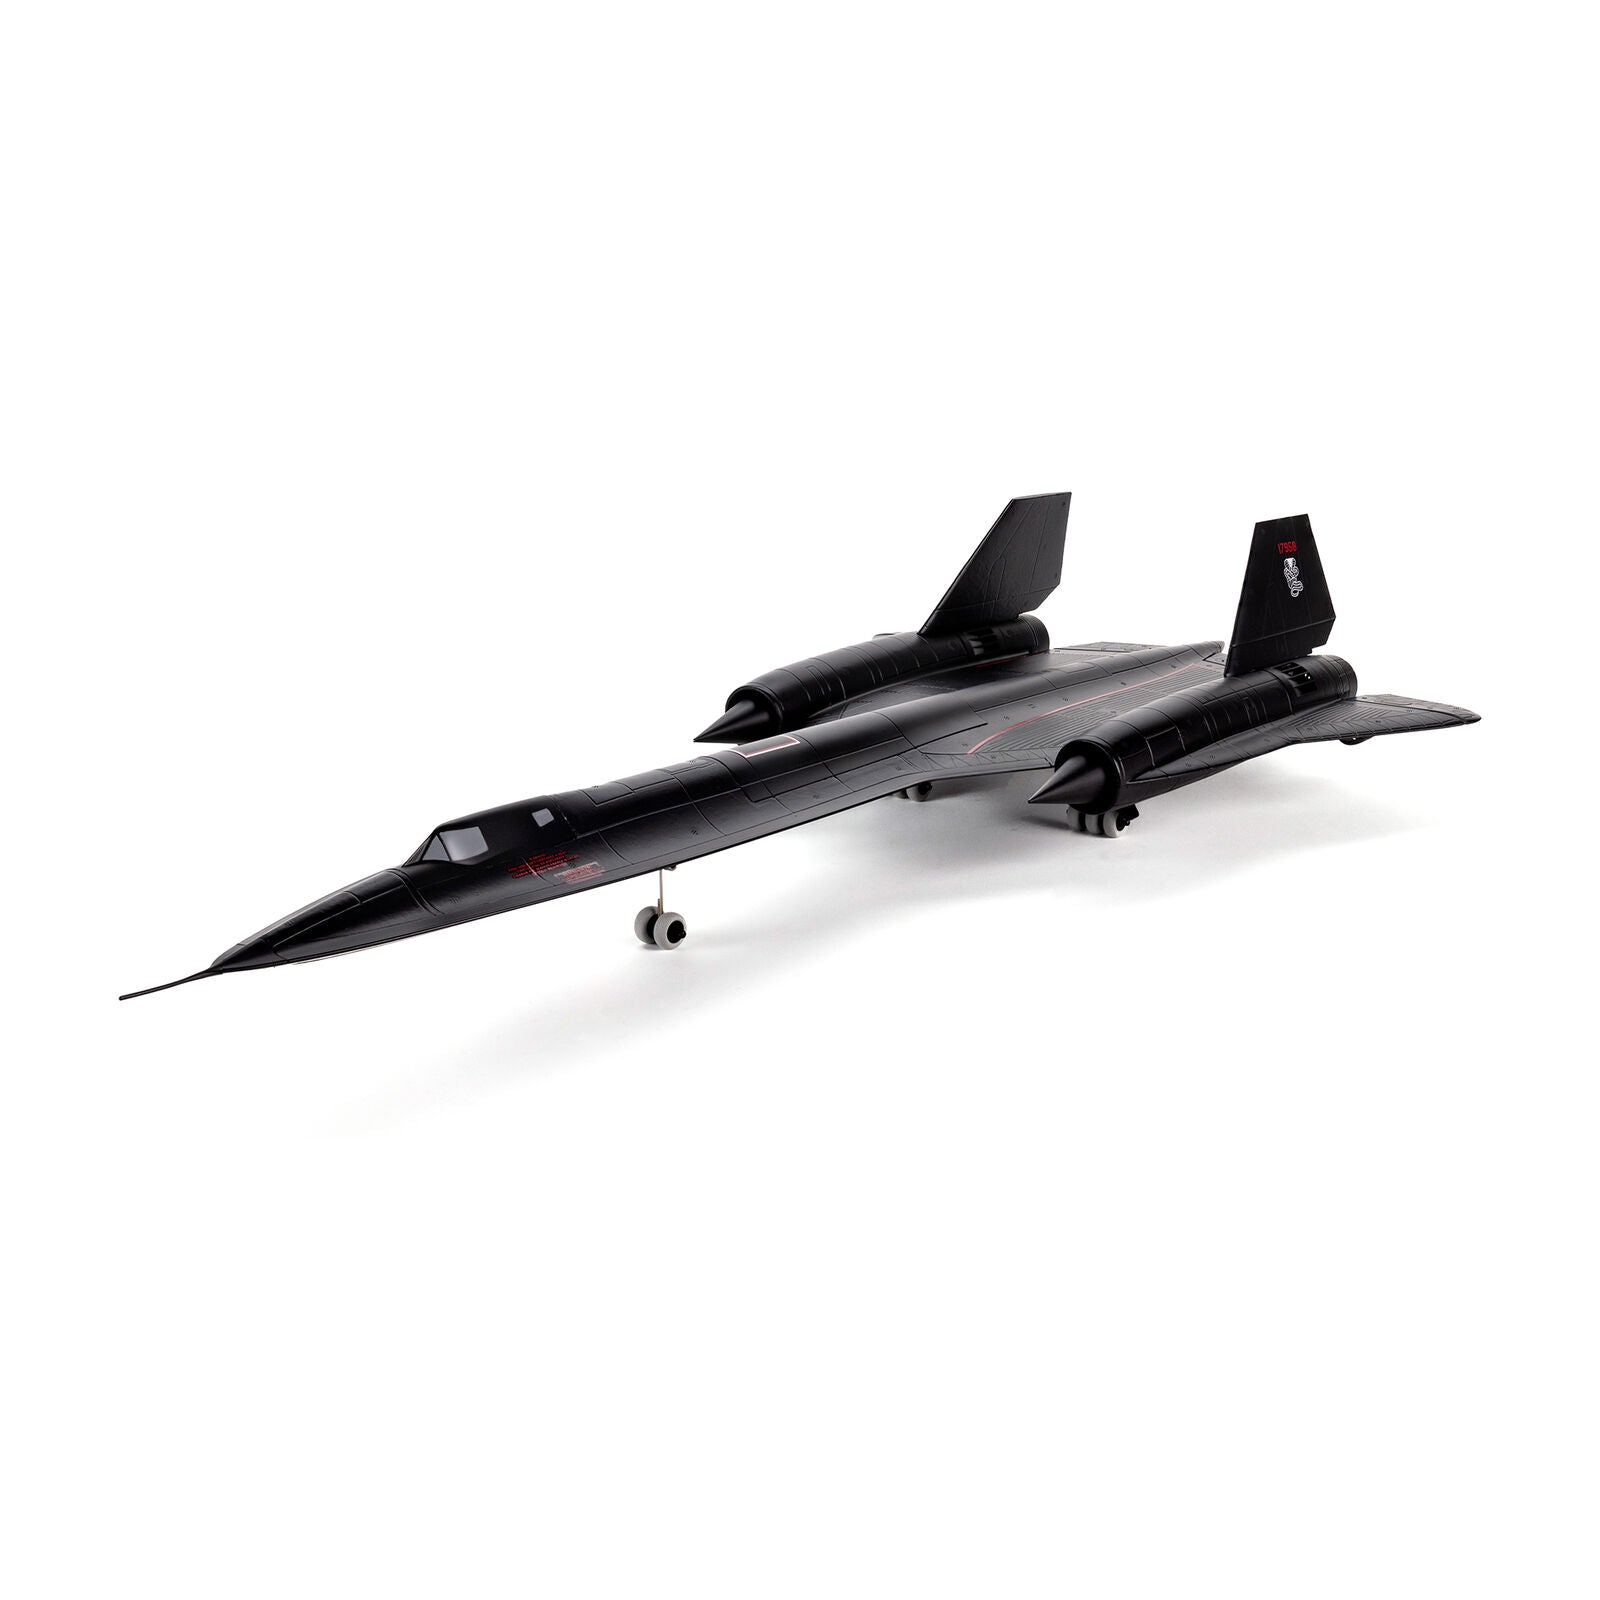 EFLITE EFL02050 SR-71 Blackbird Twin 40mm EDF BNF Basic with AS3X and SAFE Select